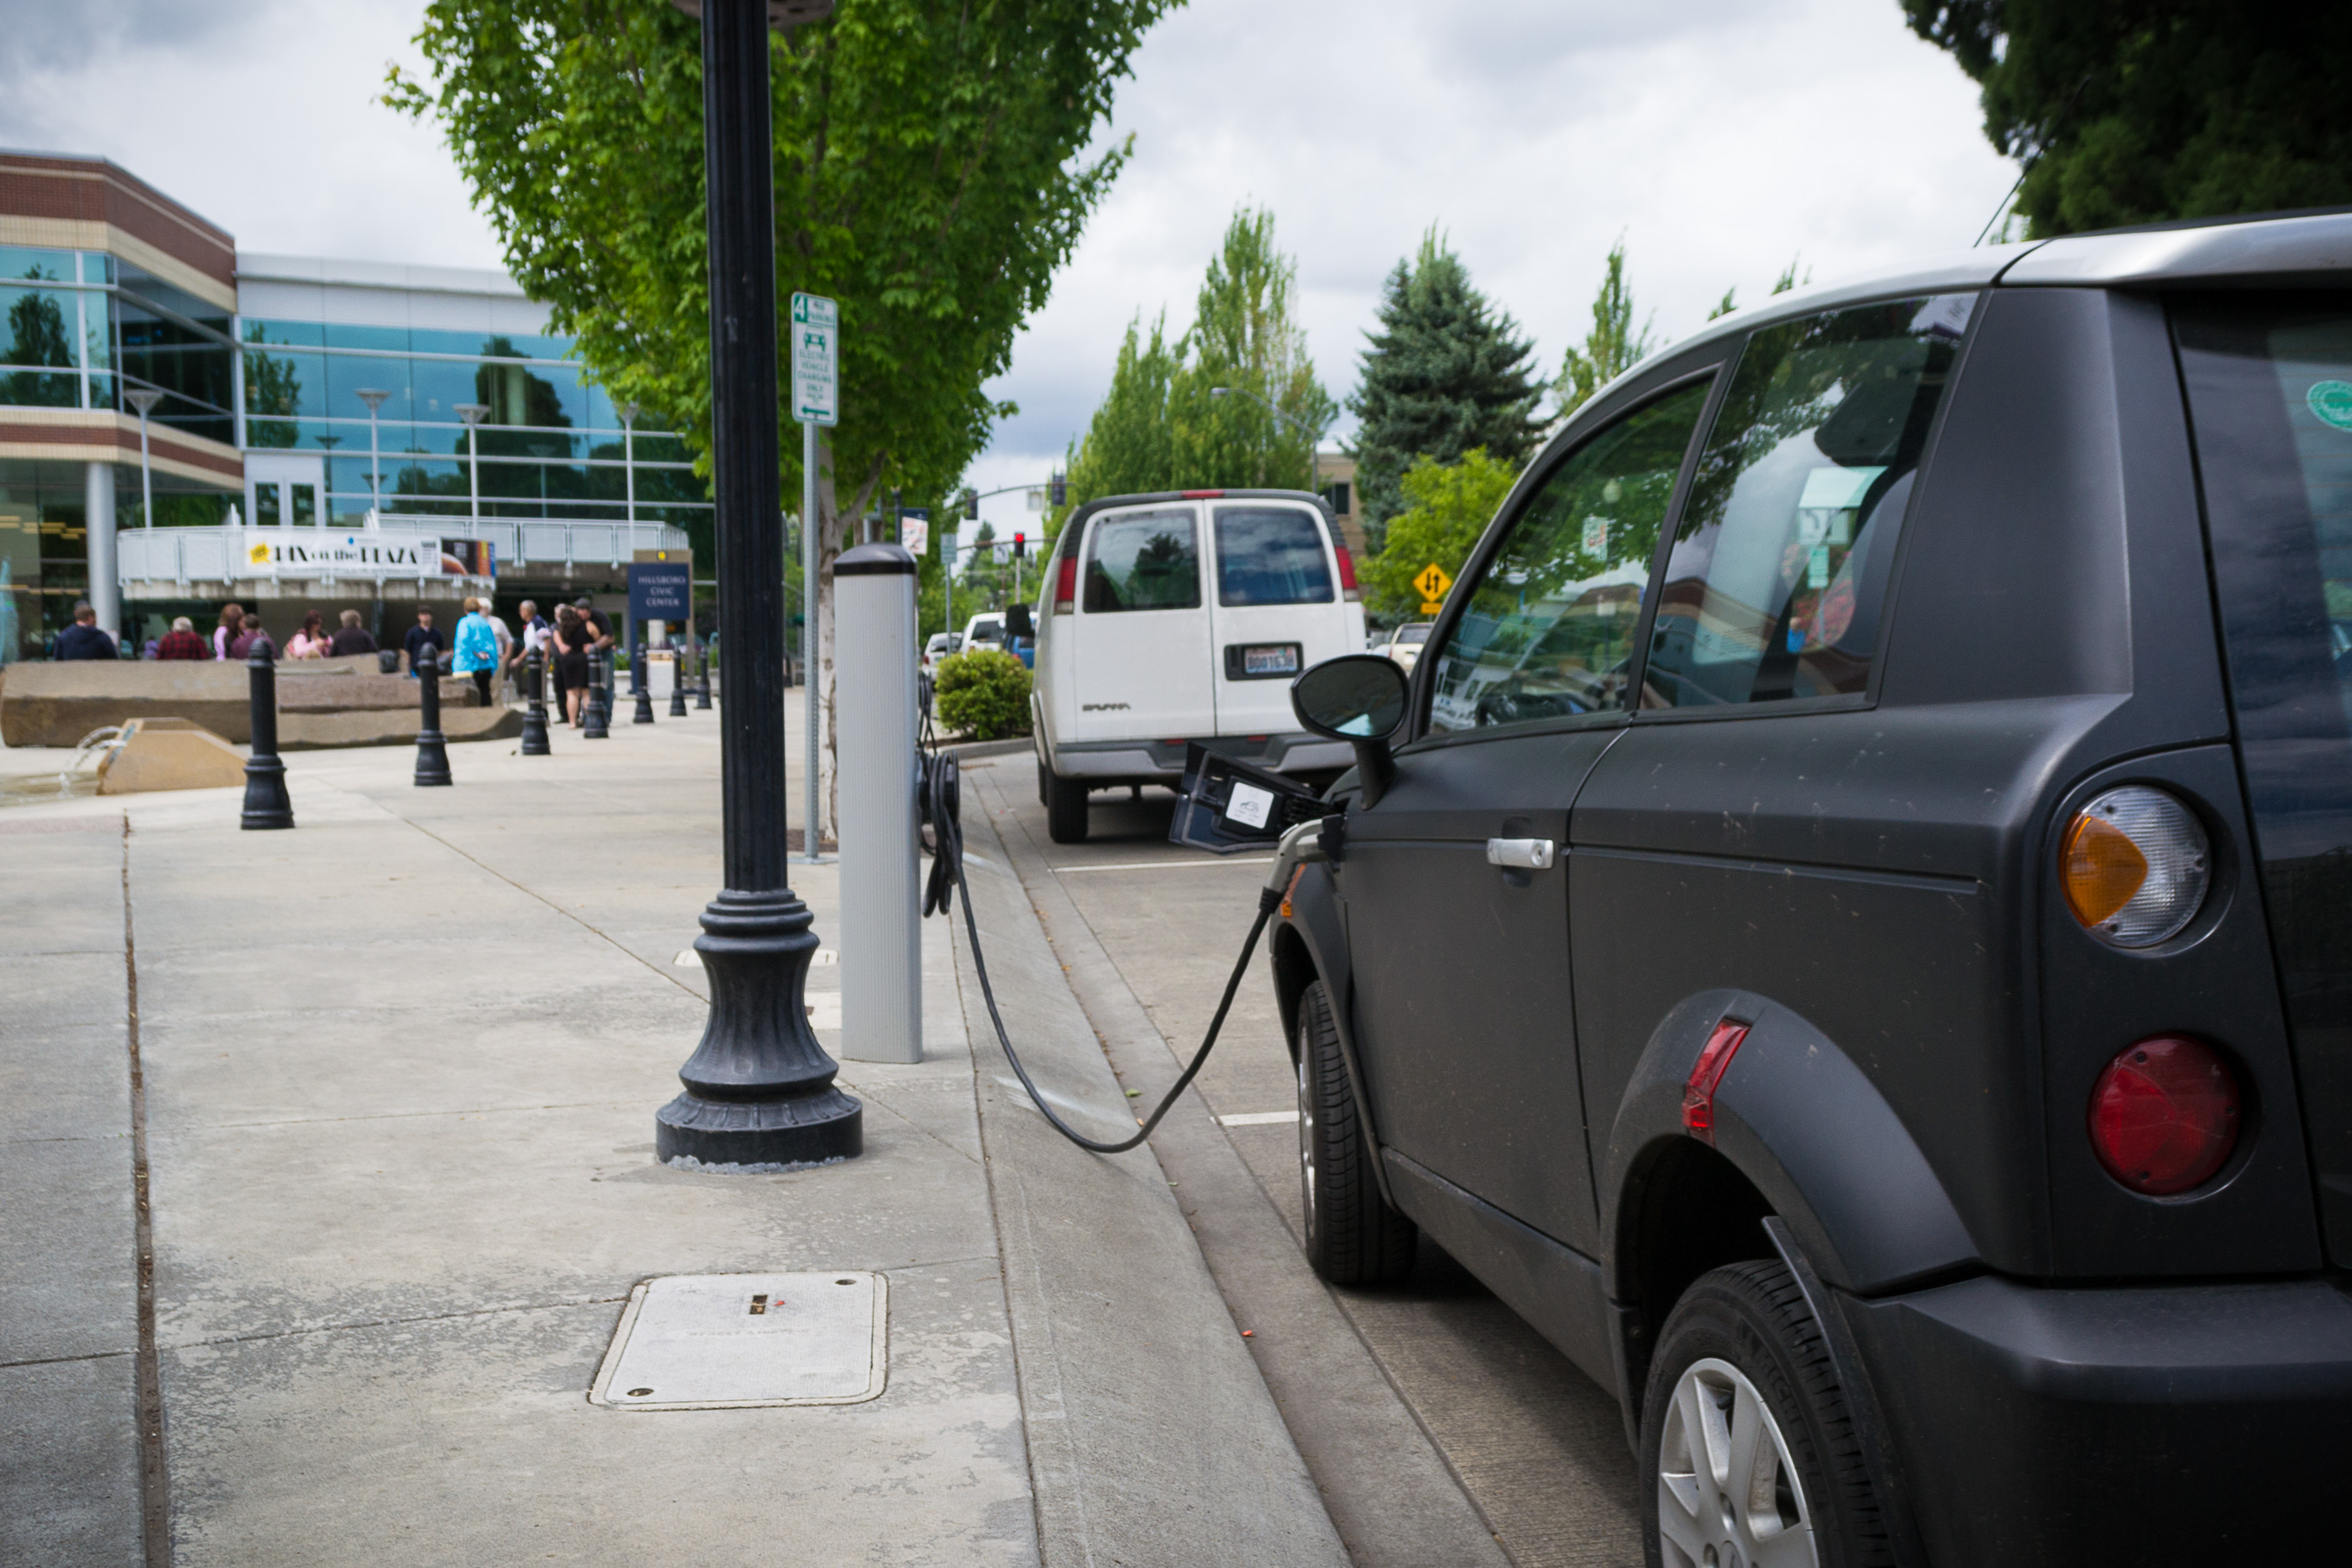 Charging Colorado’s Electric Vehicle is Full Steam Ahead — The I70